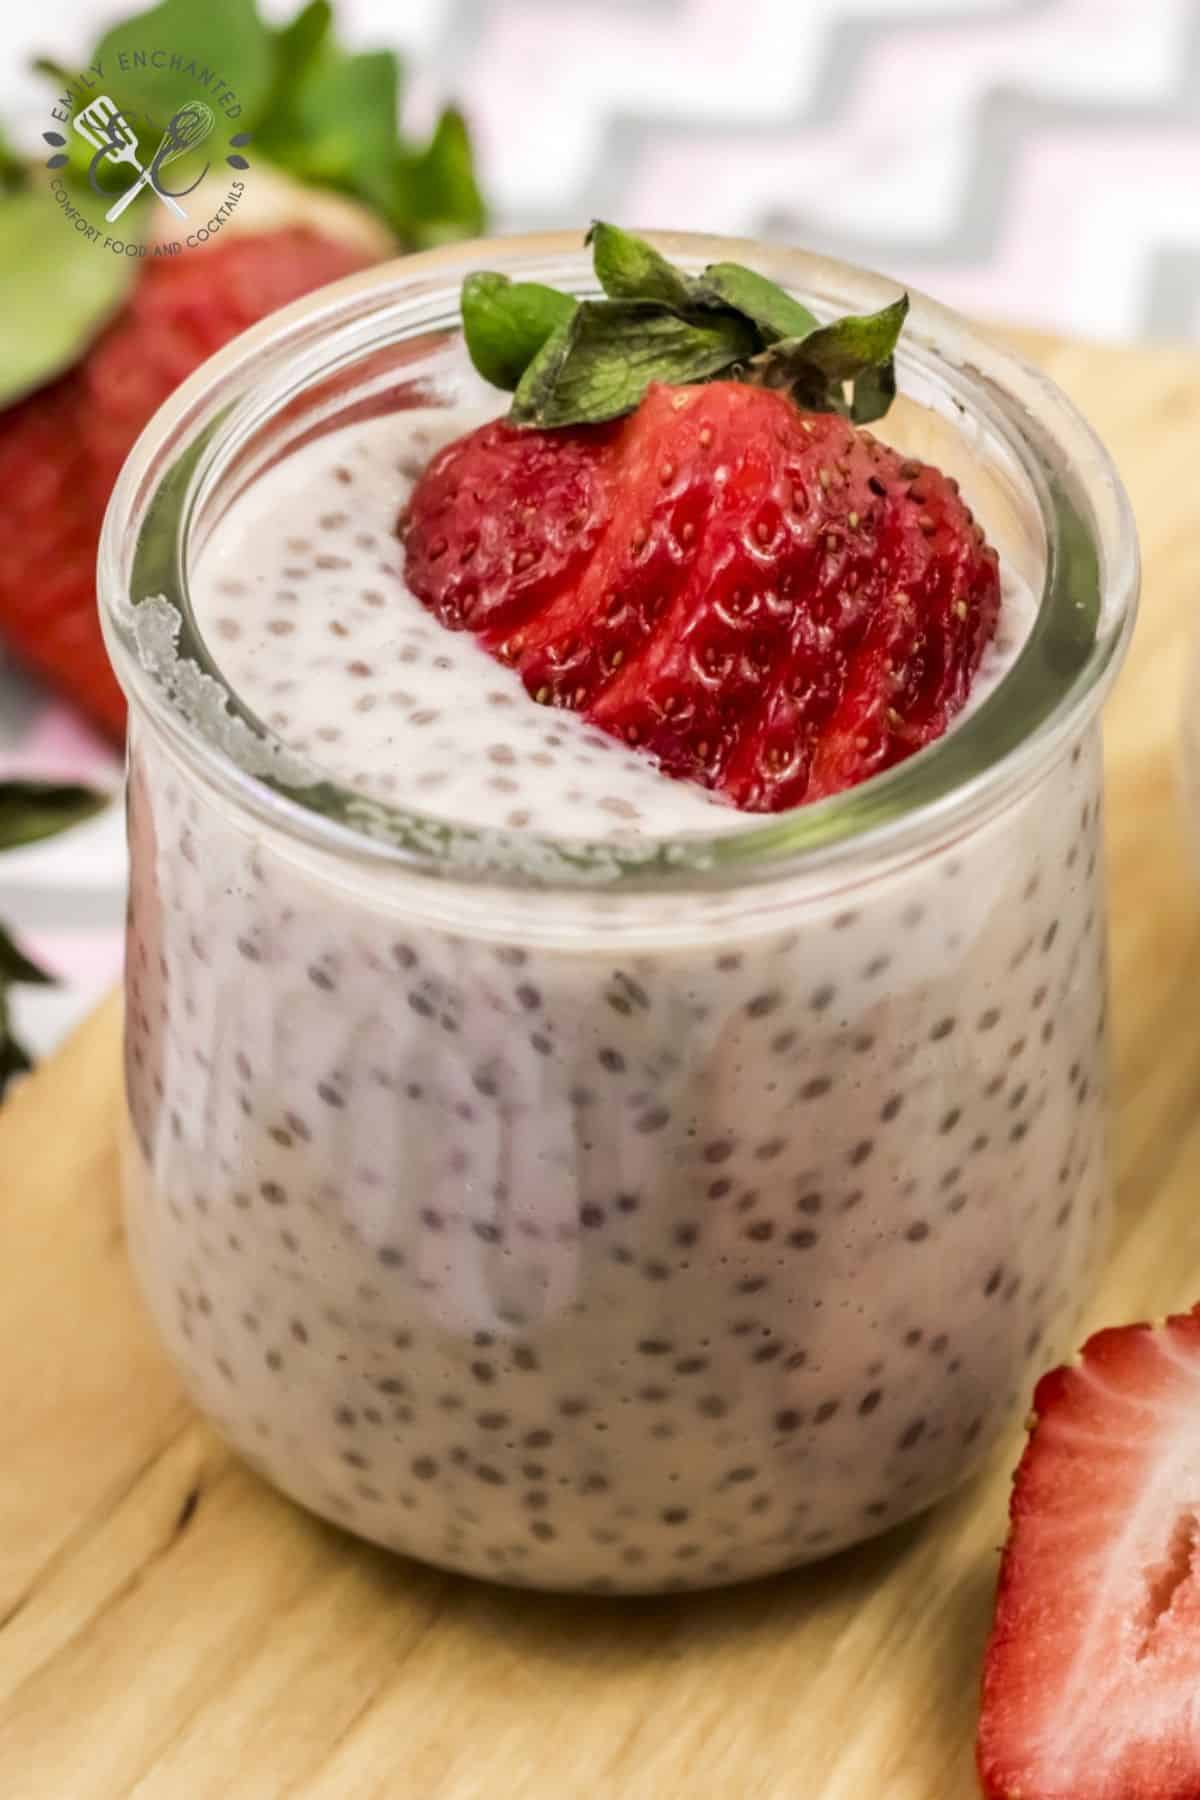 Strawberry Pudding Recipe with Chia Seeds